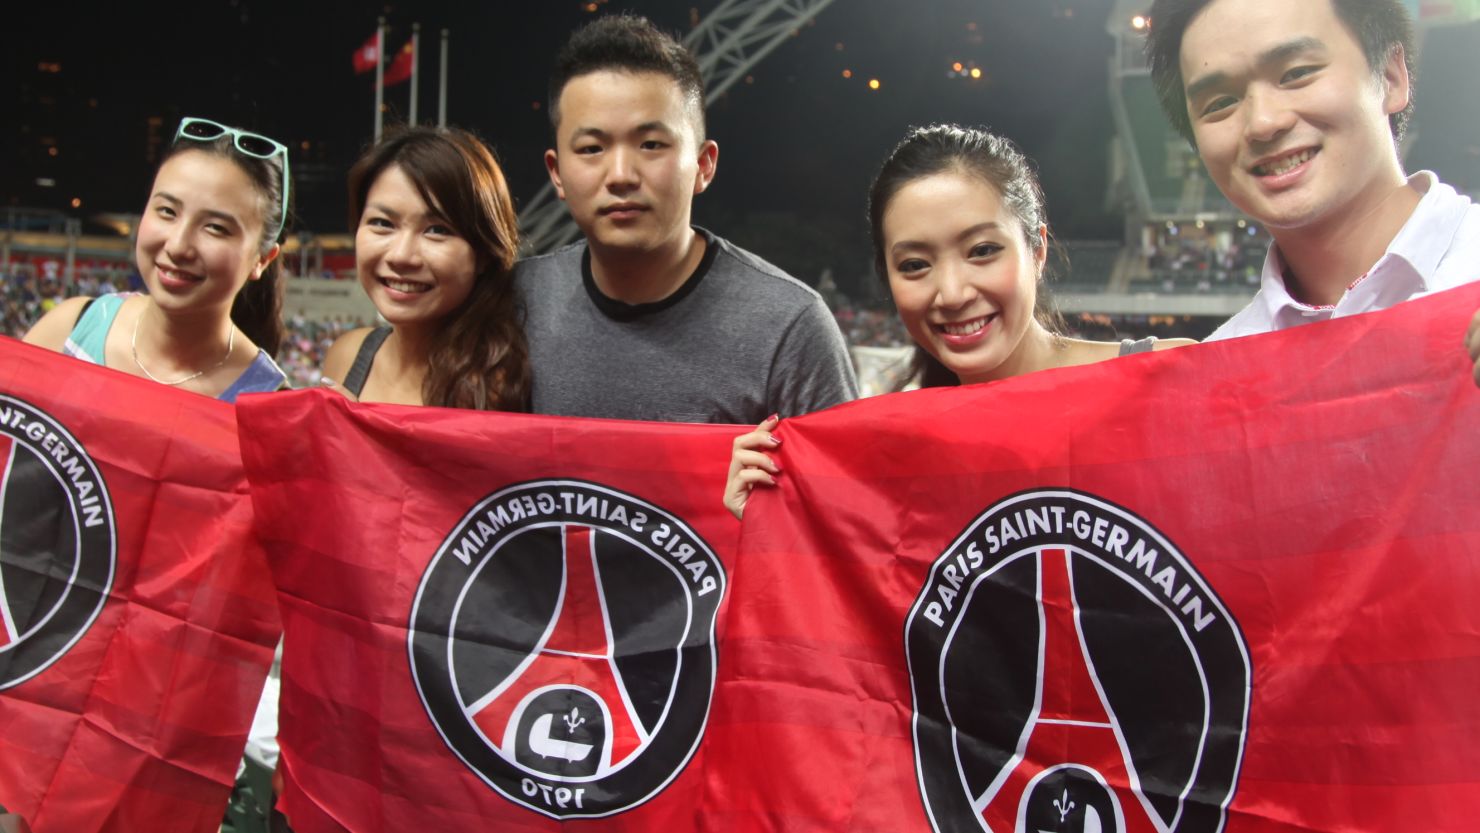 PSG fans welcome their team to Hong Kong Stadium for a friendly match against local champion Kitchee.